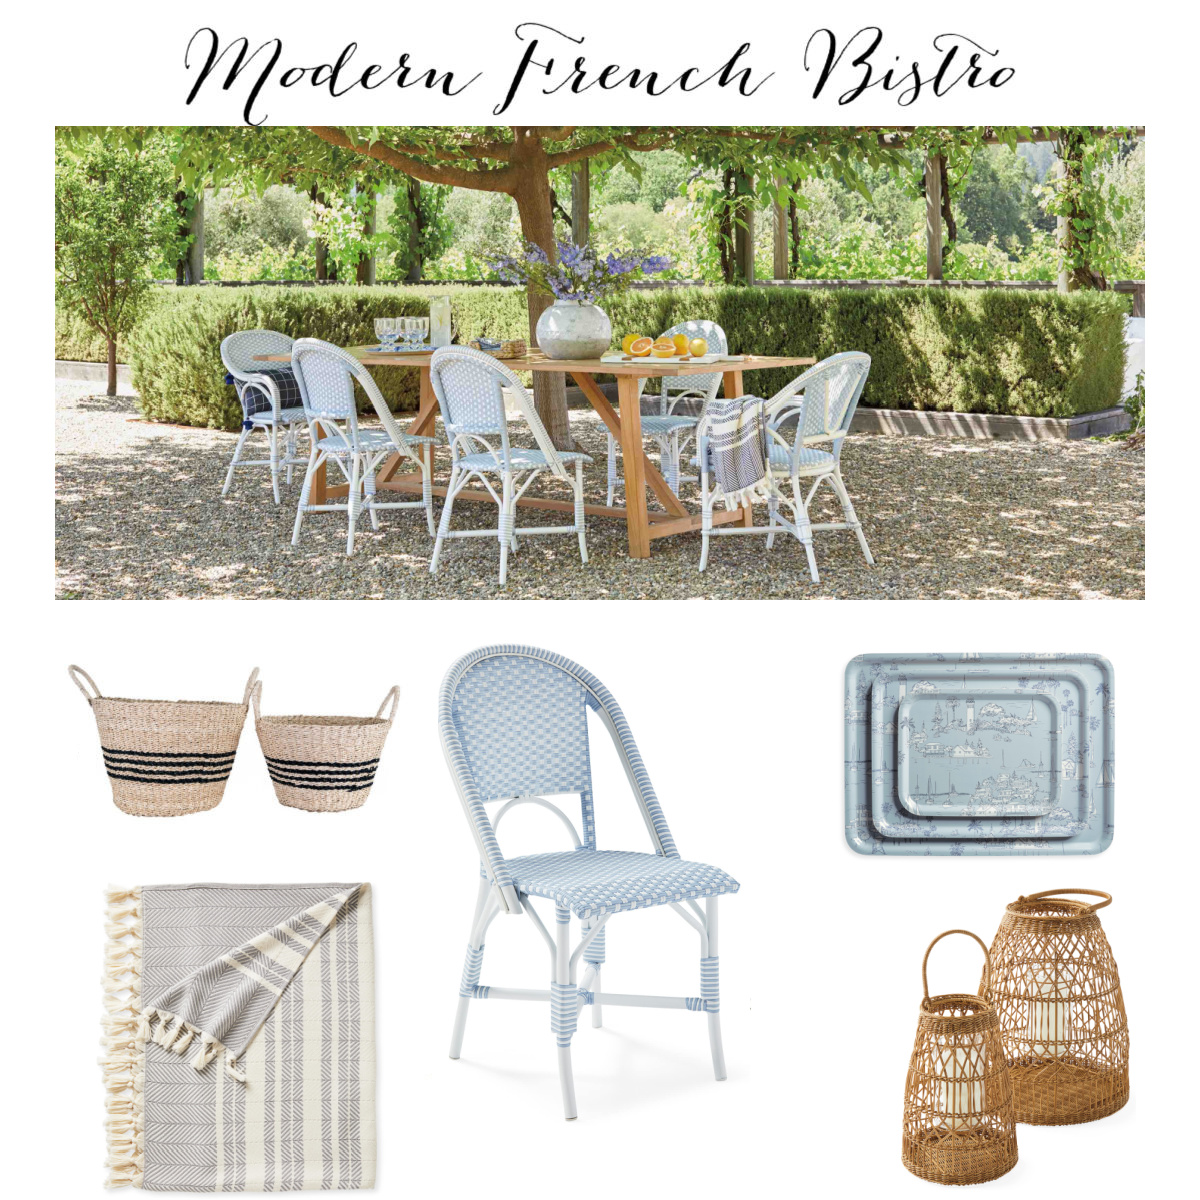 Modern French Bistro Outdoor Oasis. #modernfrench #patiofurniture #outdoorpatio